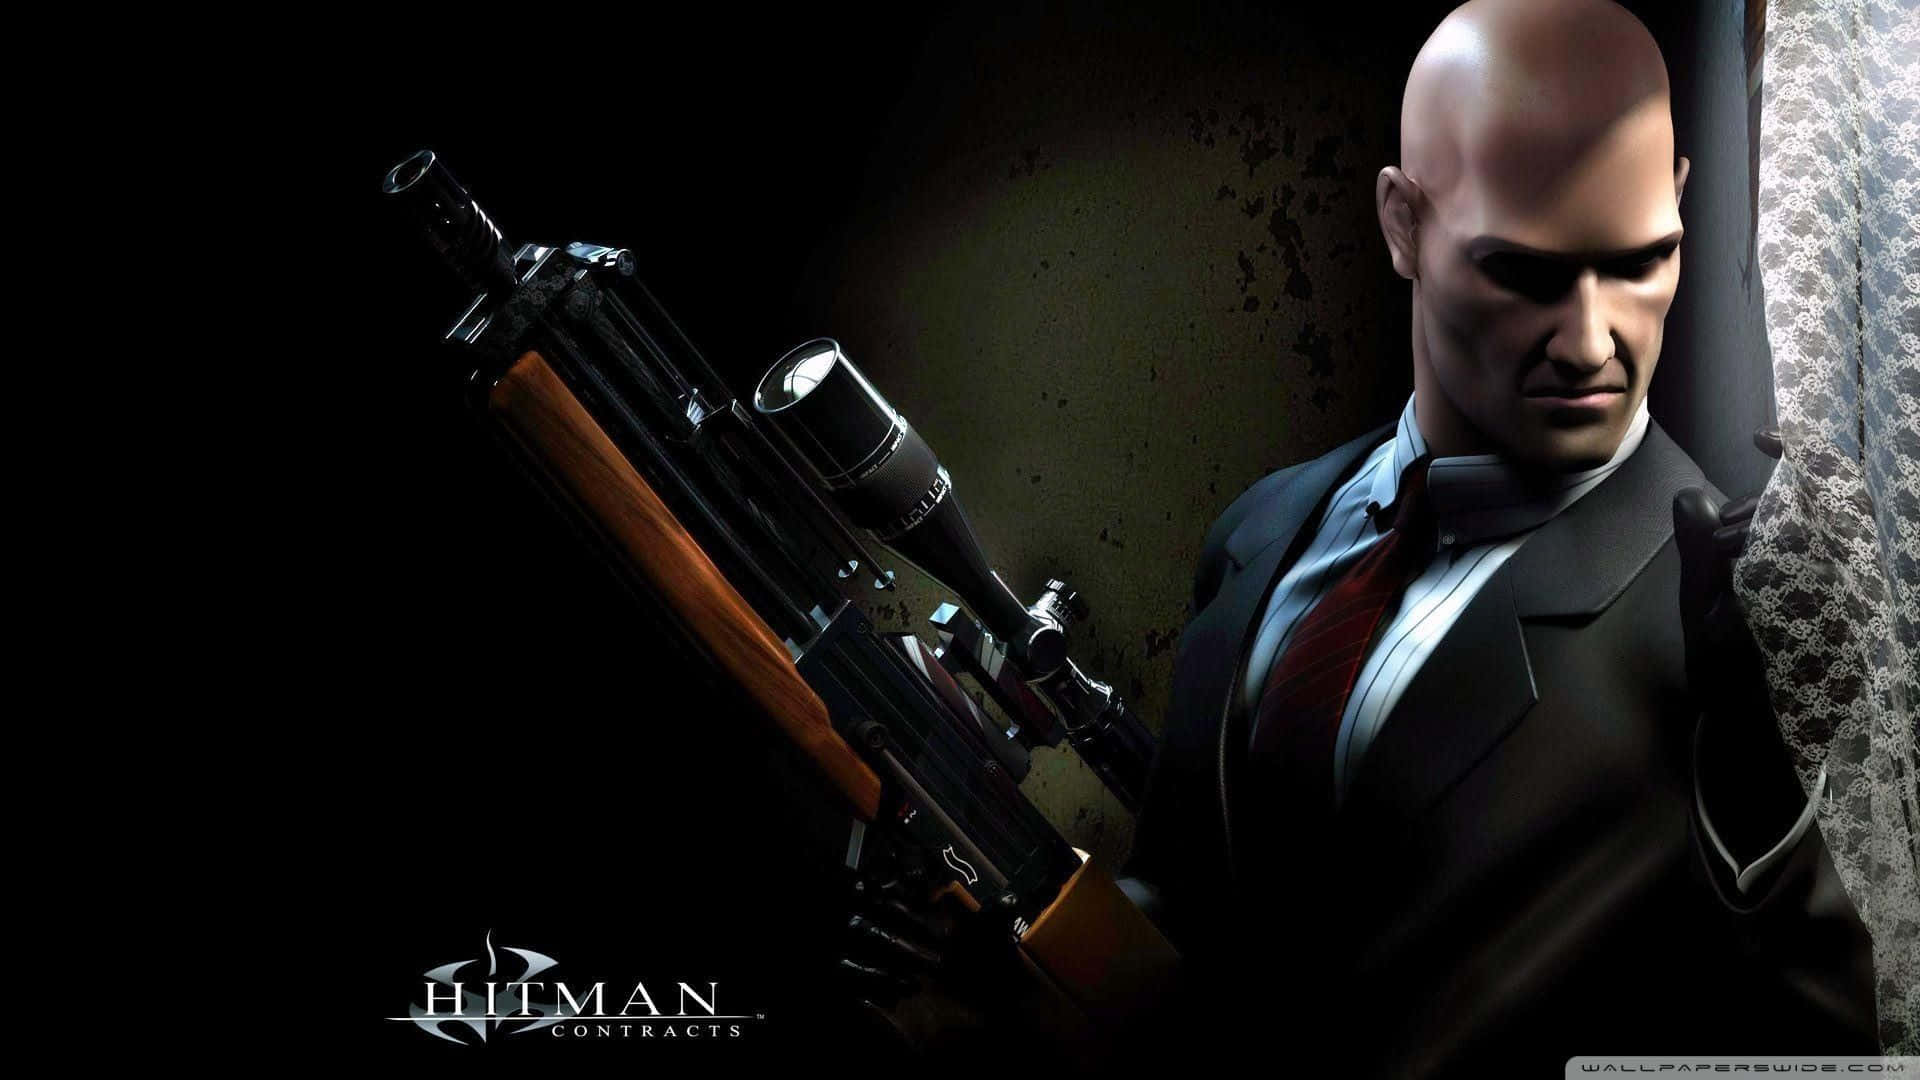 Feel the thrill of being Agent 47 in Hitman Absolution